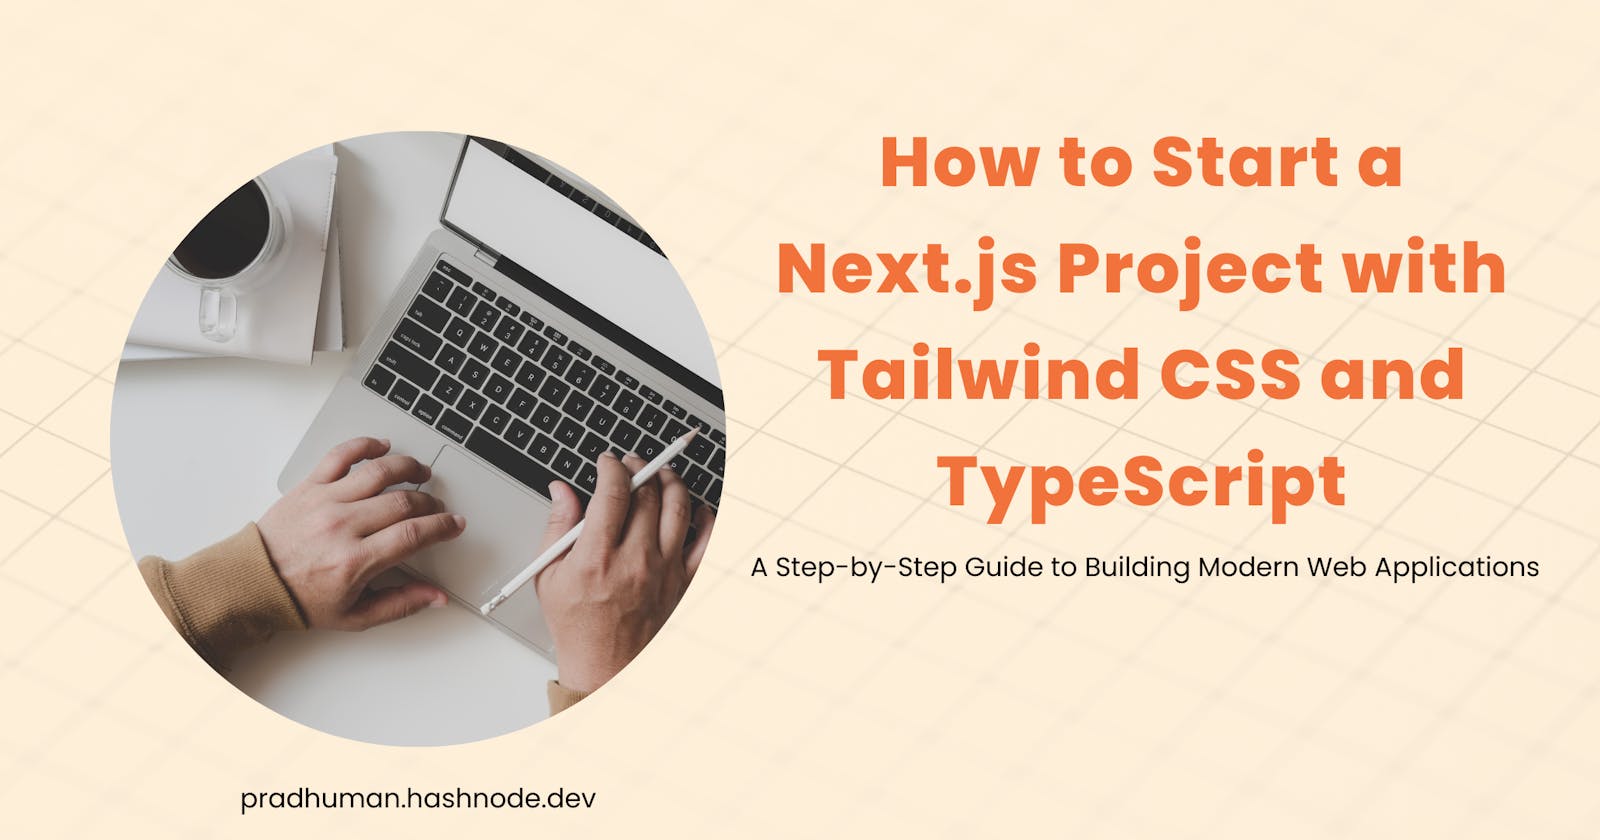 How to Start a Next.js Project with Tailwind CSS and TypeScript